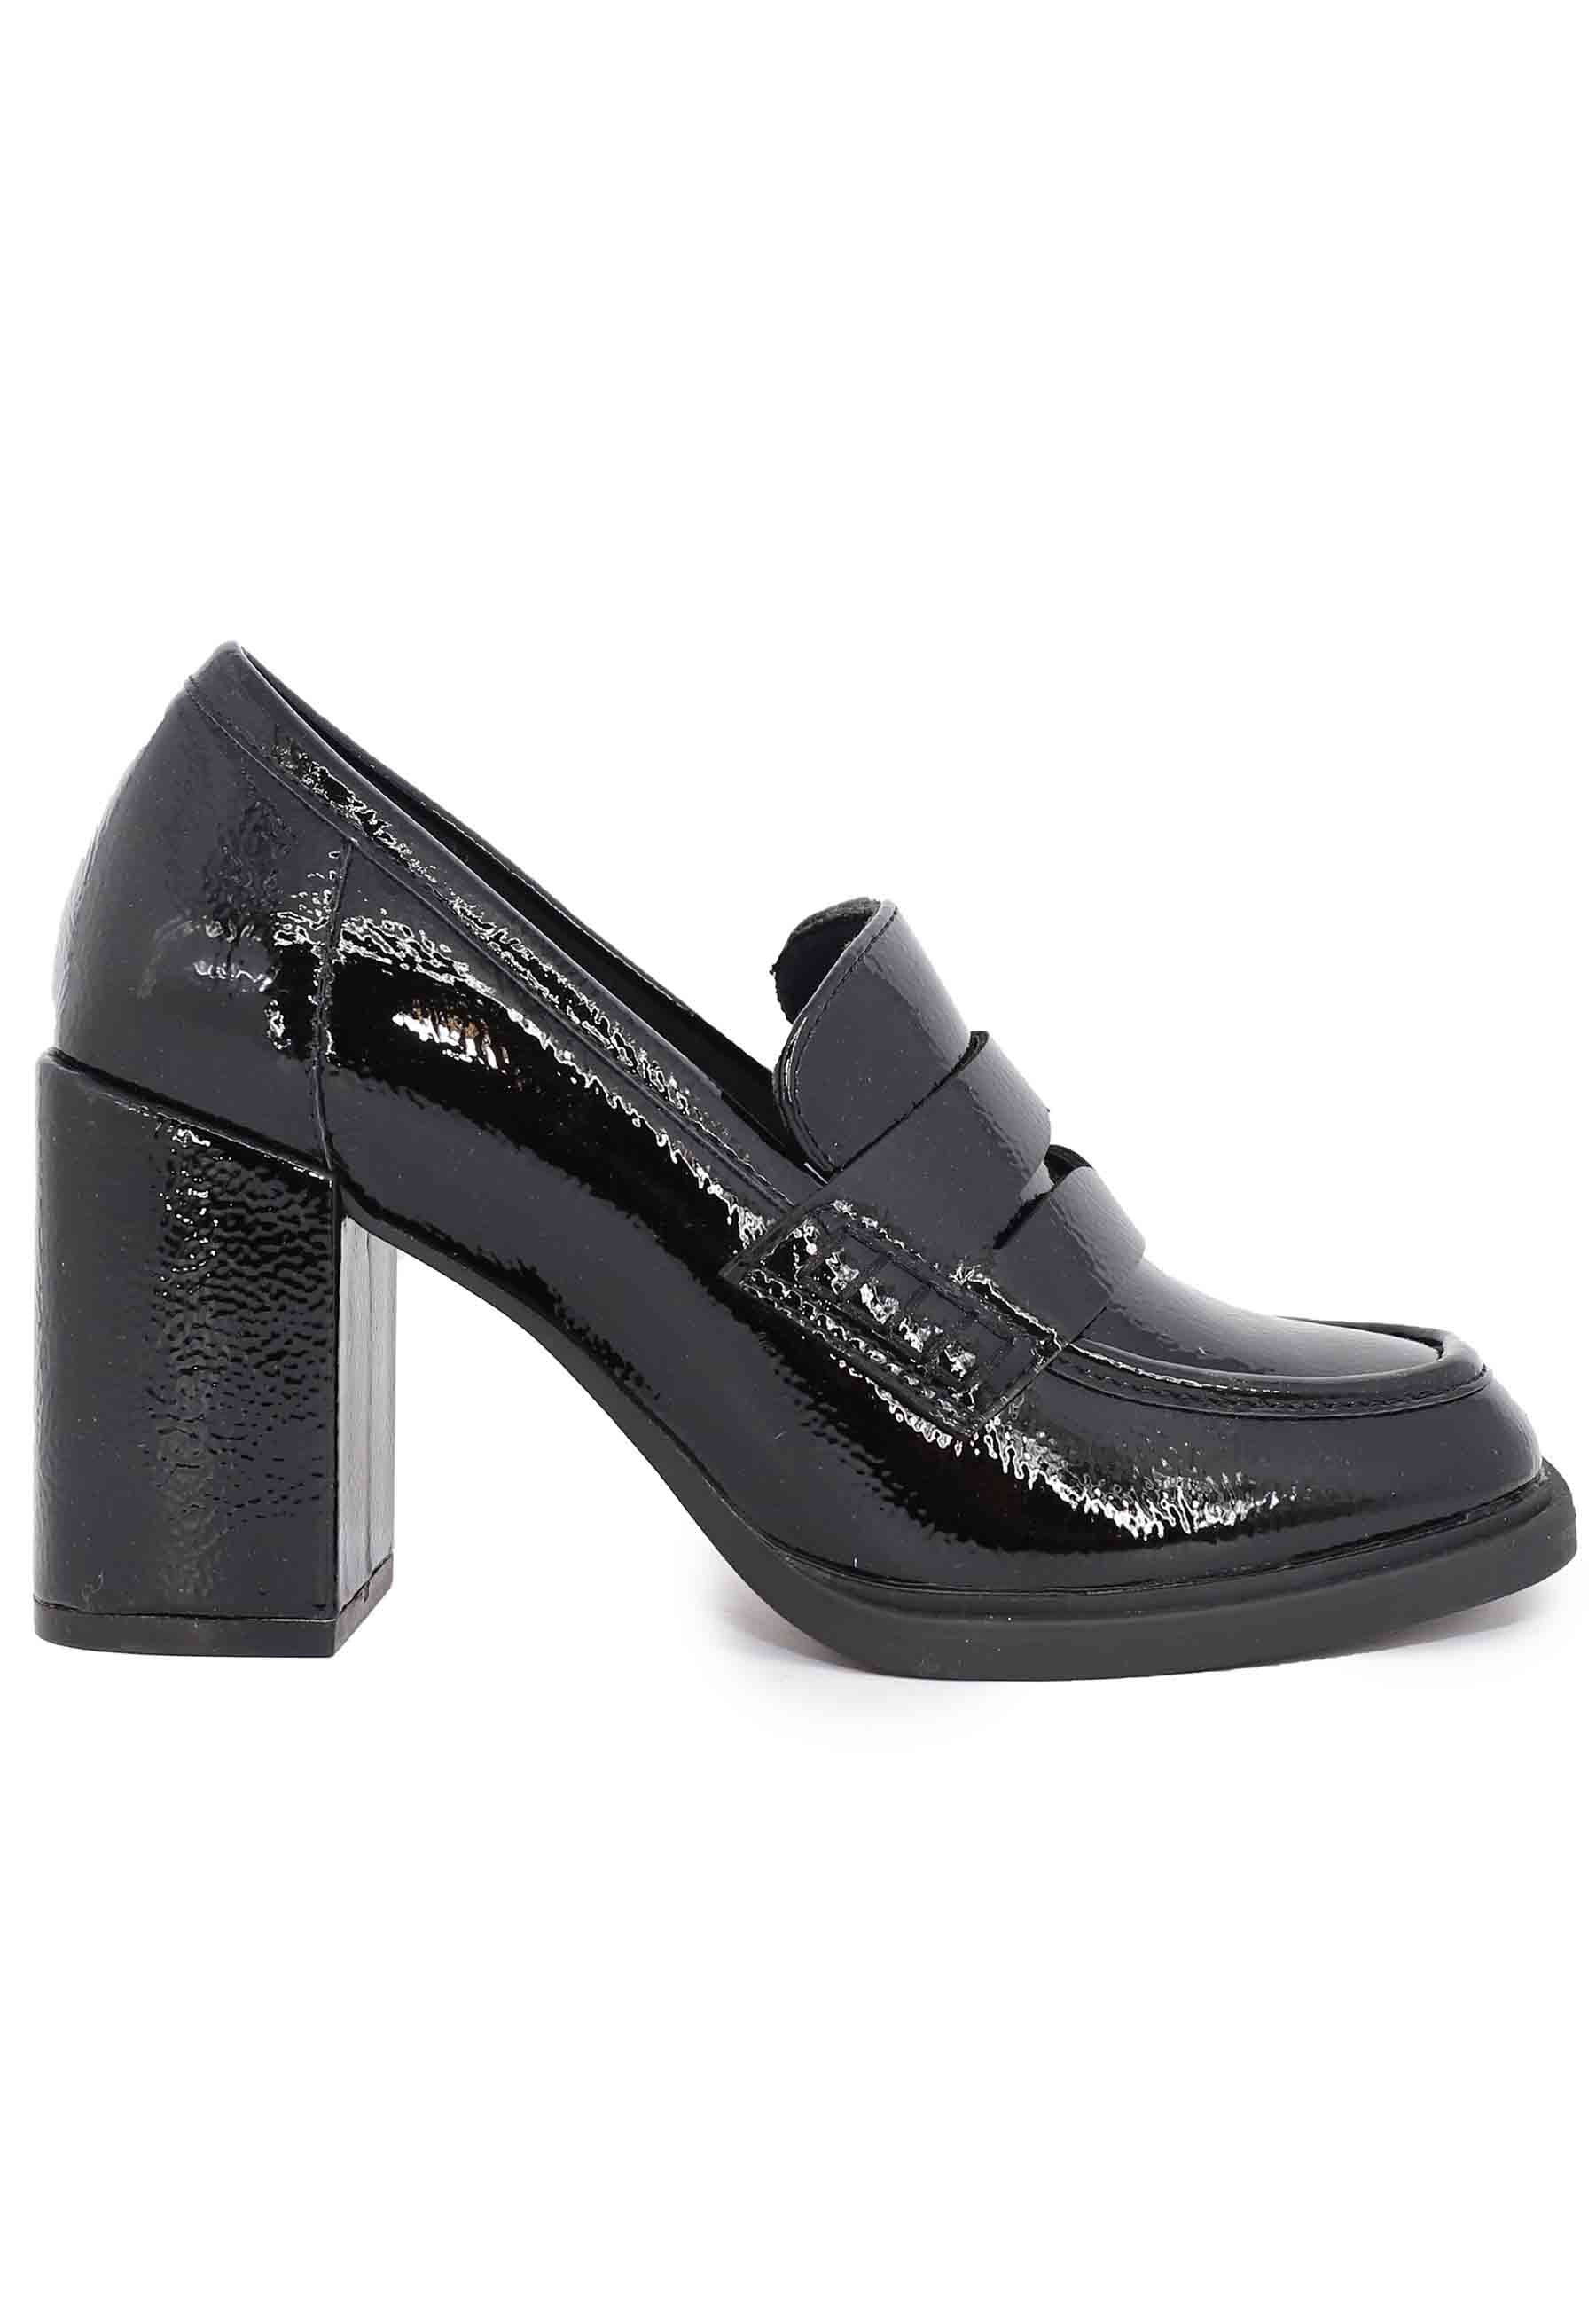 Women's black patent loafers with high heel and round toe